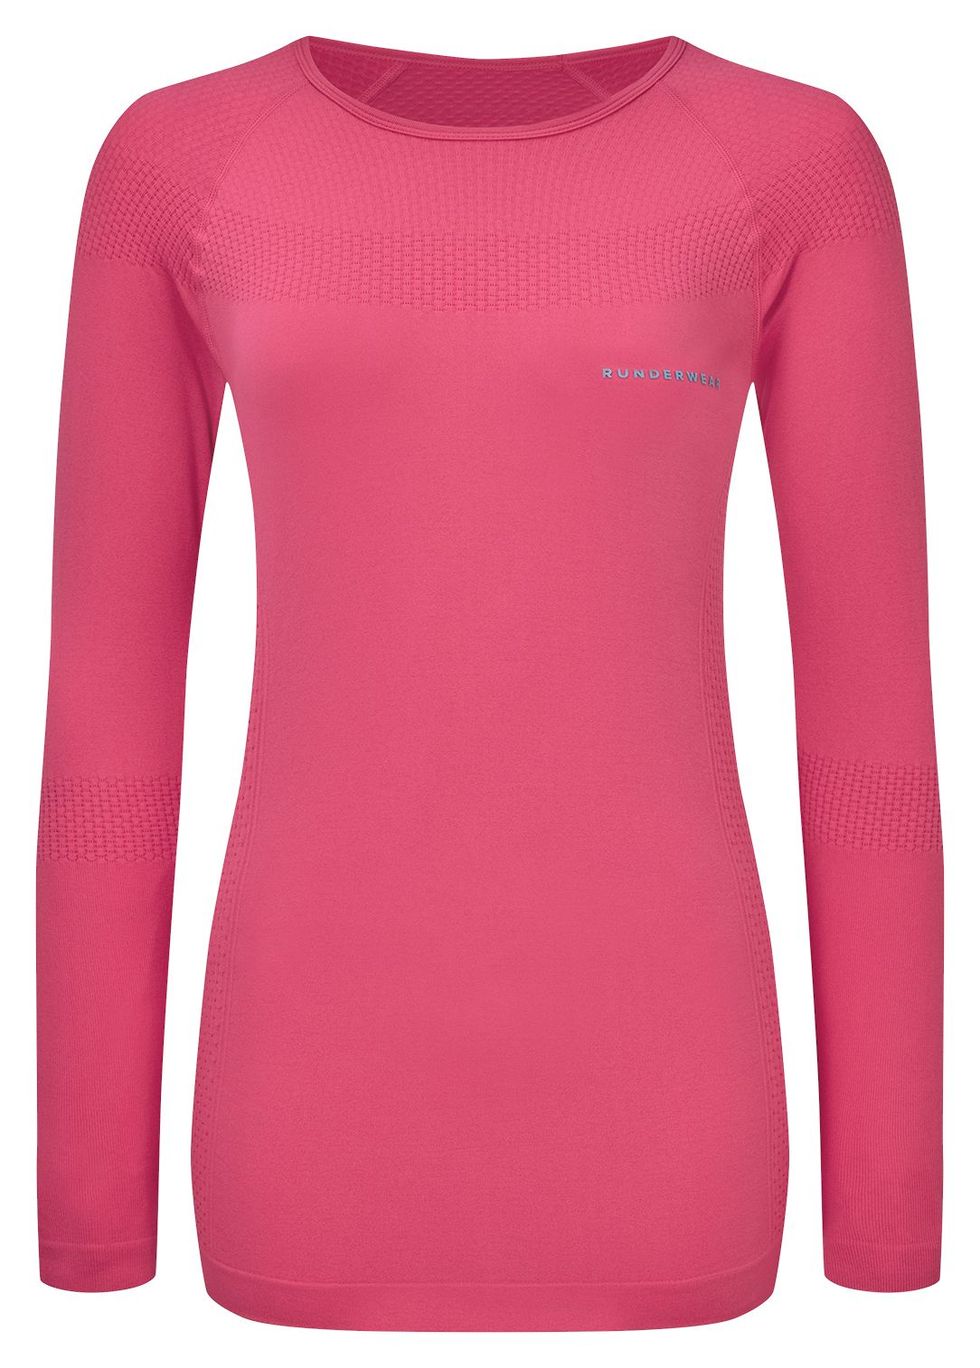 Autumn running clothes: The best women's and men's kit